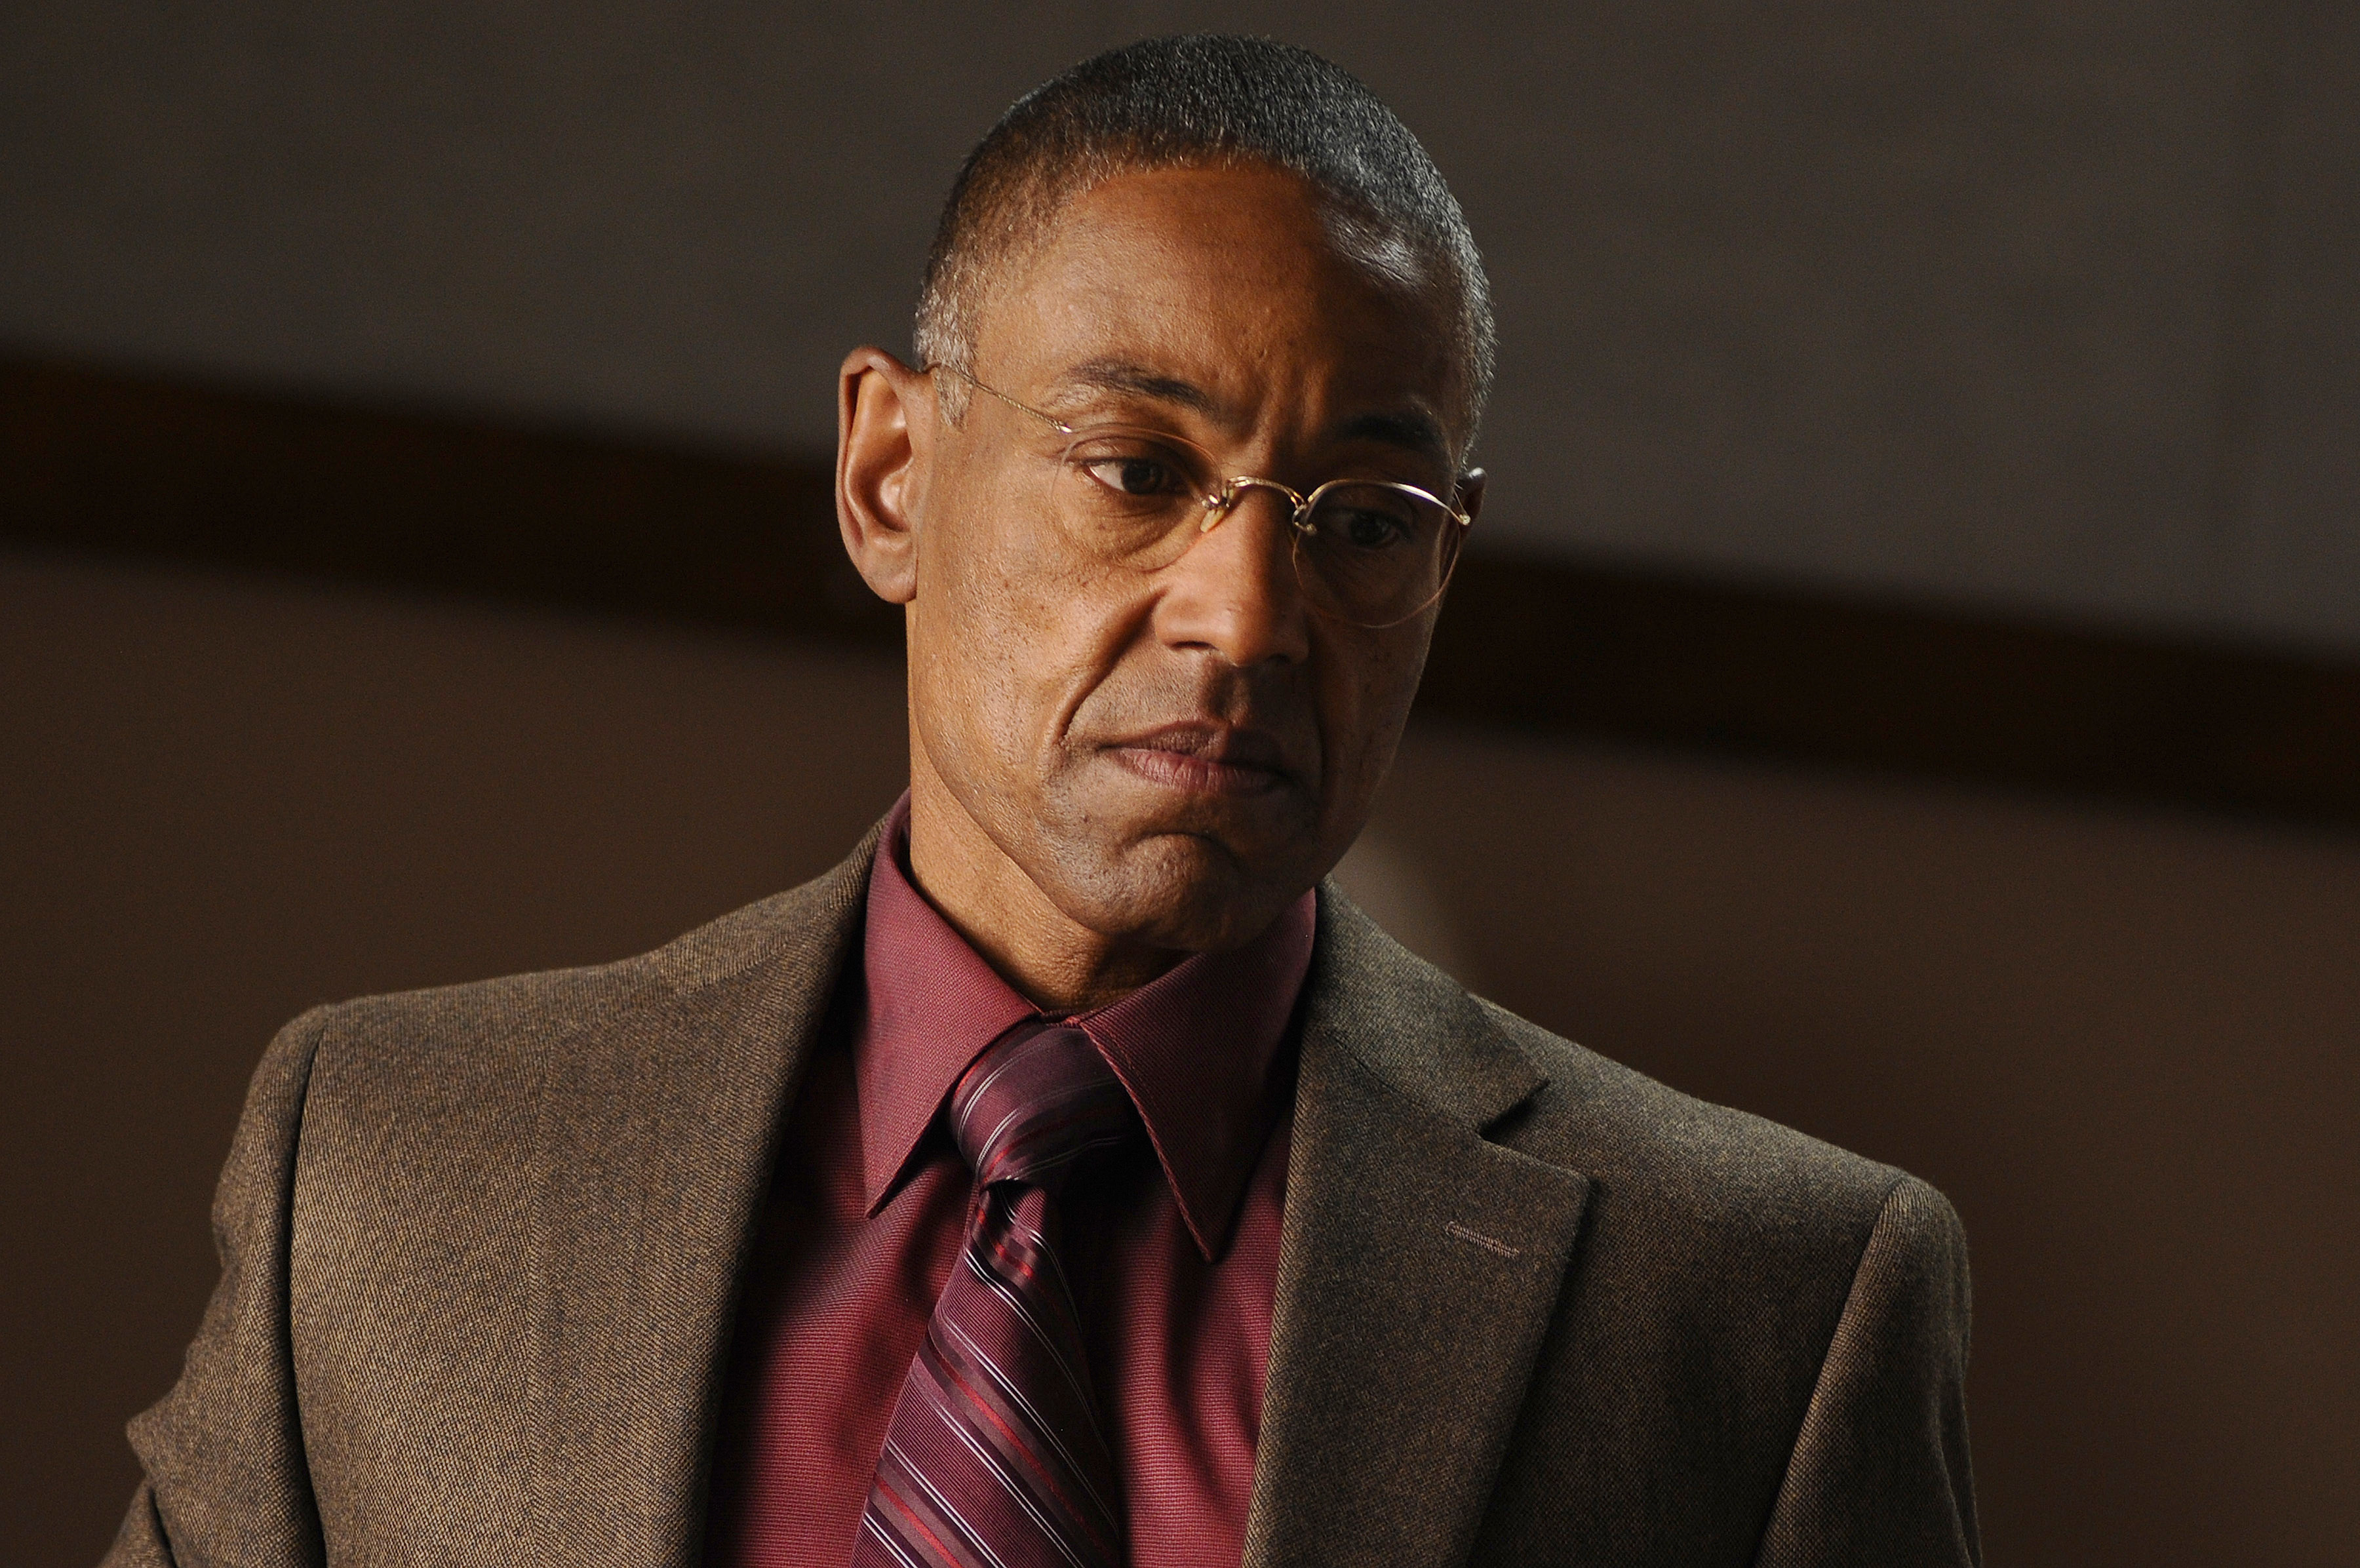 Giancarlo Esposito wearing a suit jacket with a dress shirt and tie, looking down pensively in a scene from &quot;Breaking Bad&quot;